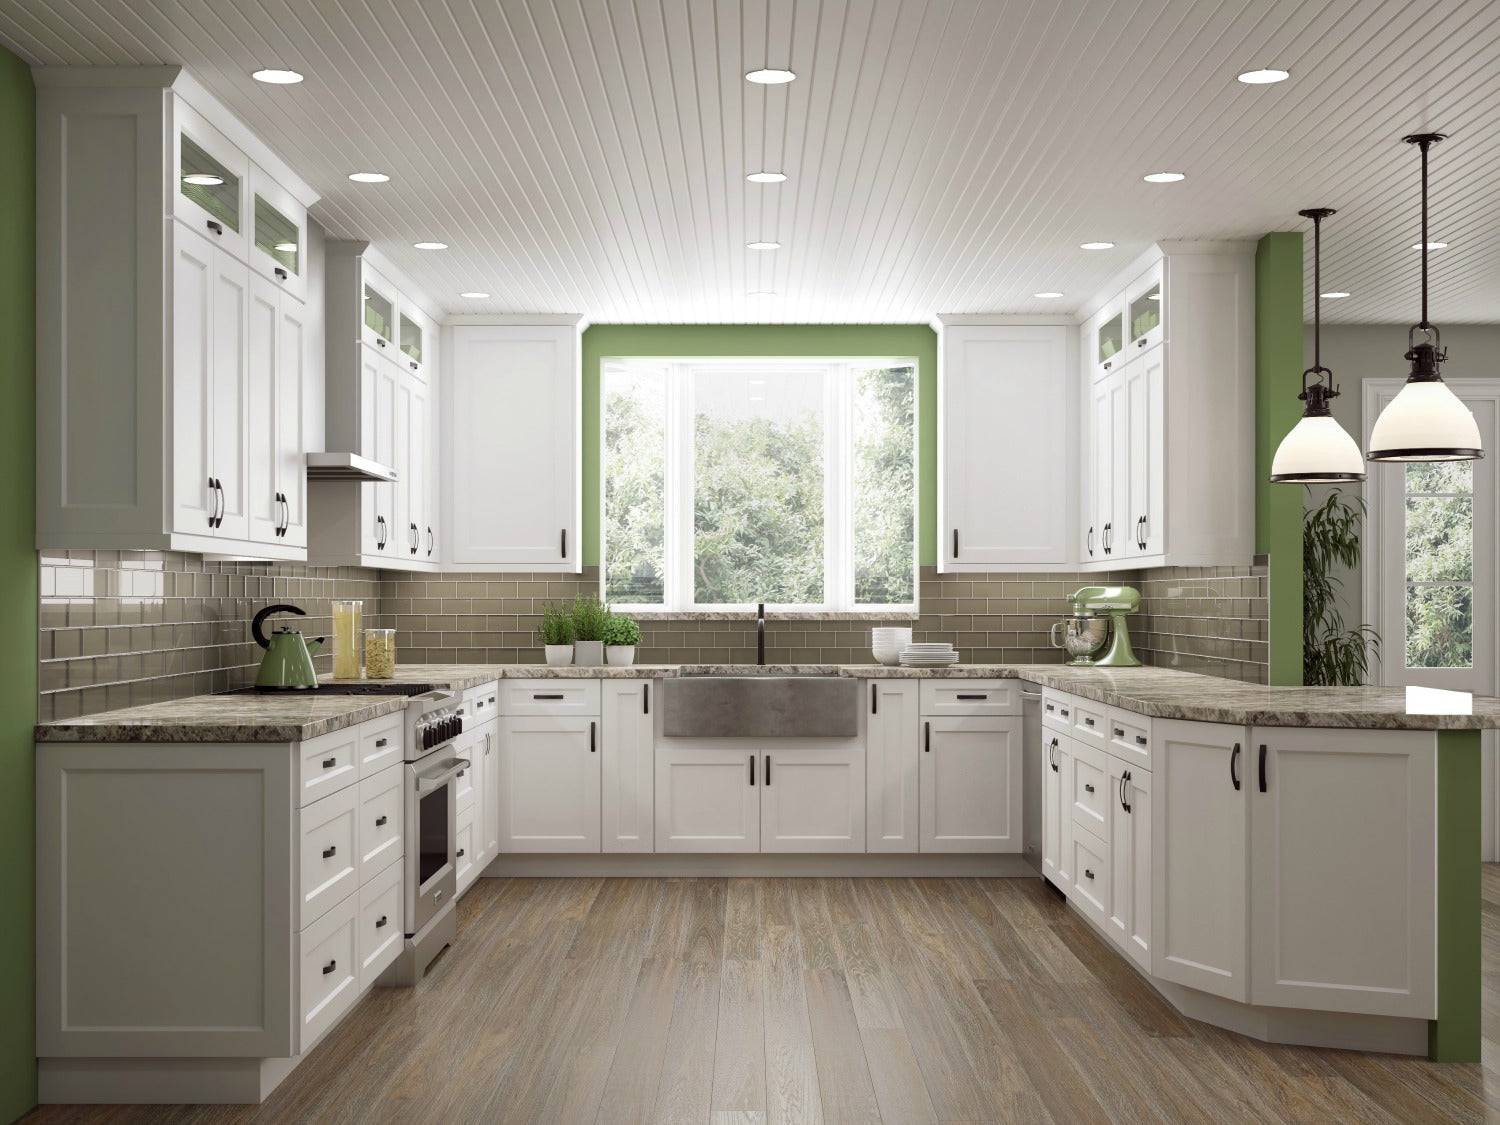 Kitchen Remodel Compromises: What Do You Need to Consider?